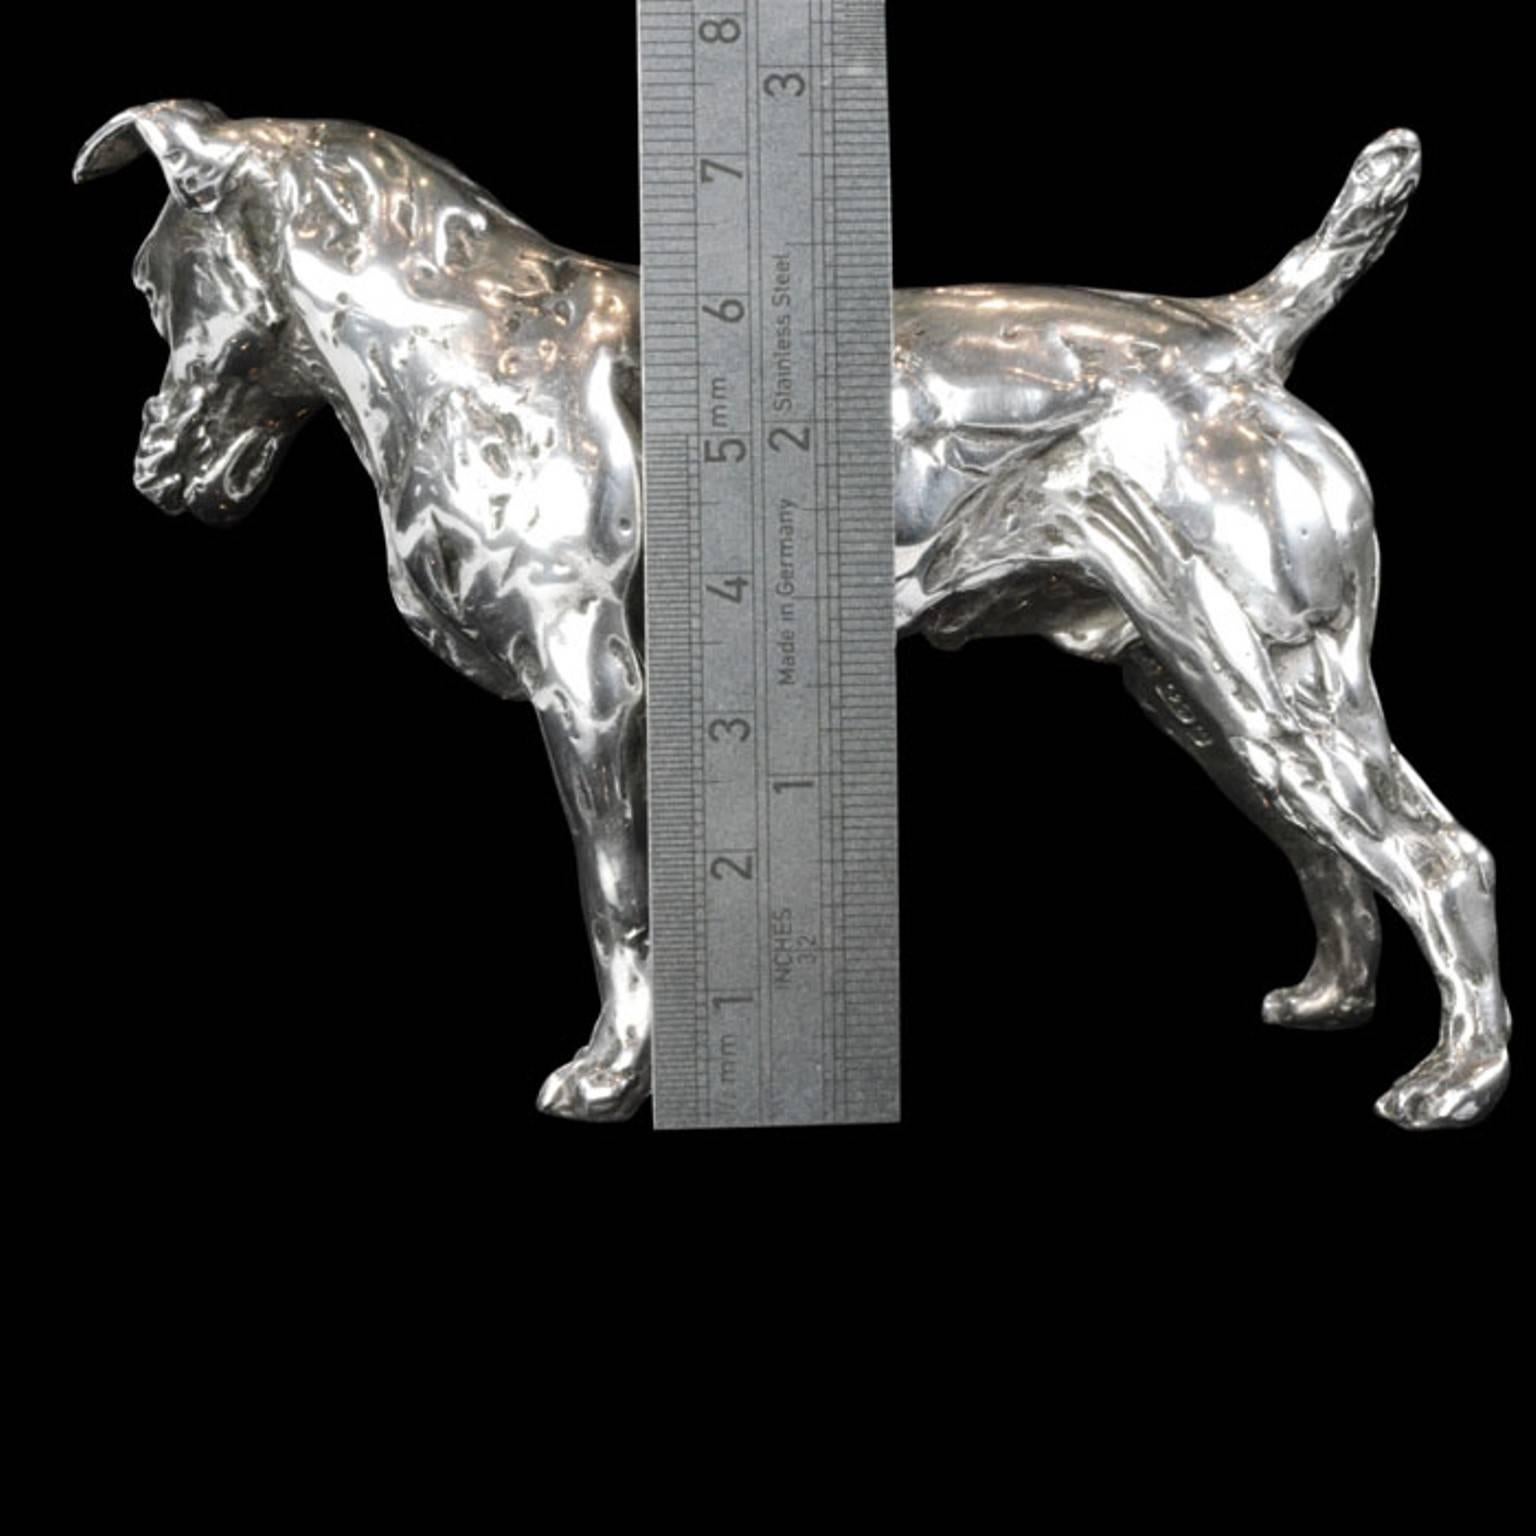  Lucy Kinsella 'Patterdale Terrier' in Sterling silver, Silver sculpture  2